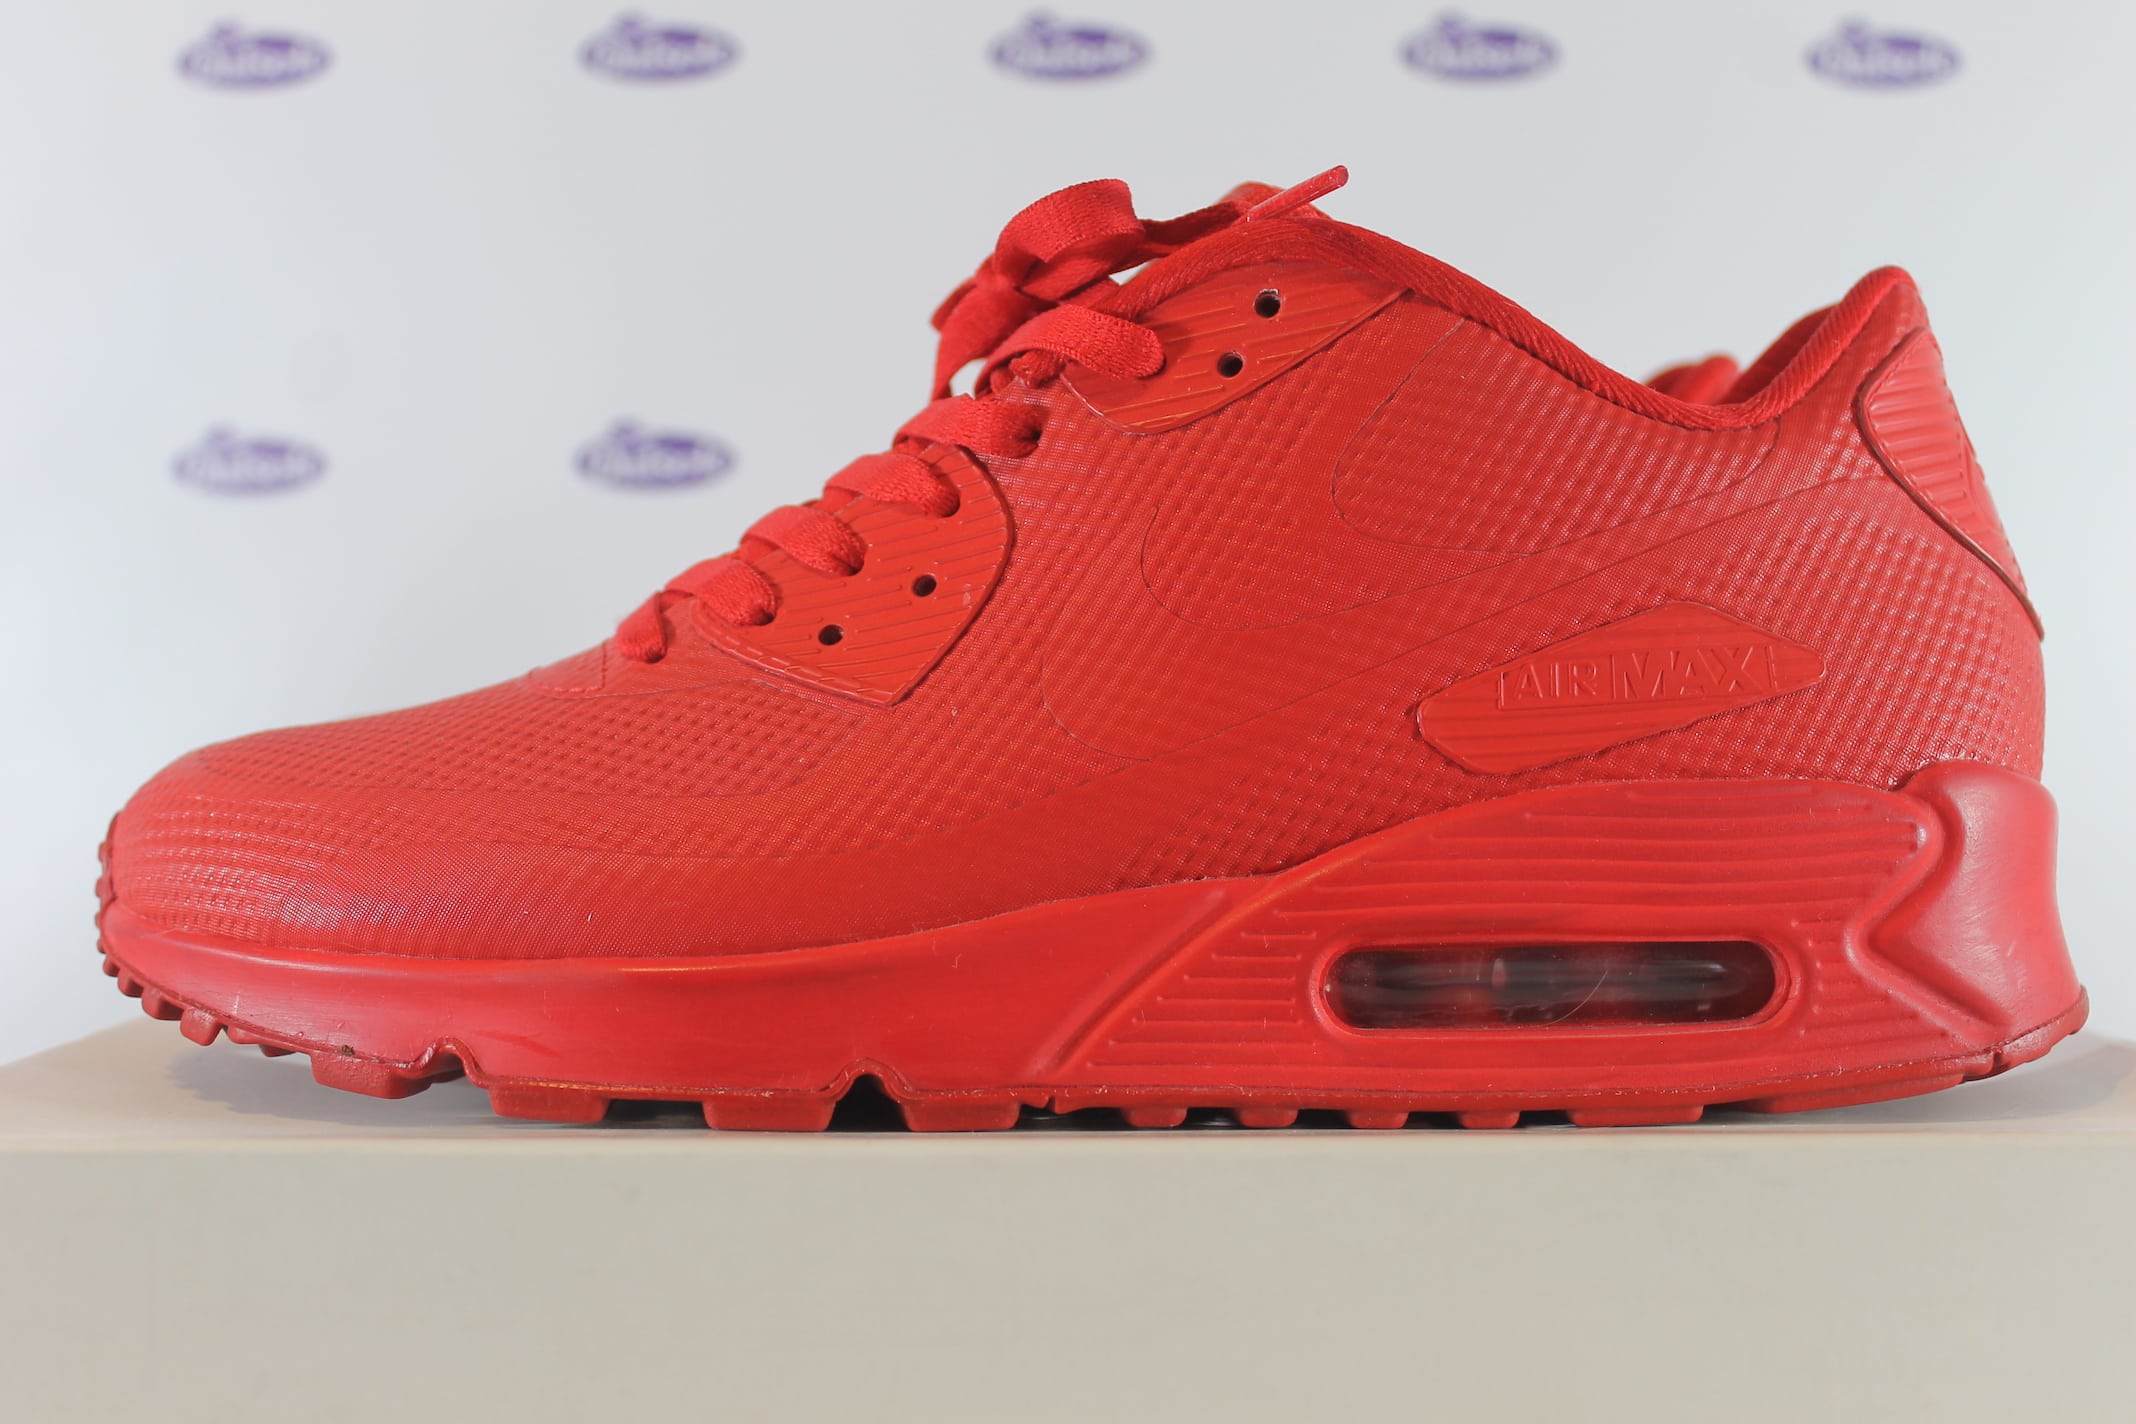 perfume Tumba Aplastar Nike Air Max 90 ID Premium Hyperfuse Red • ✓ In stock at Outsole